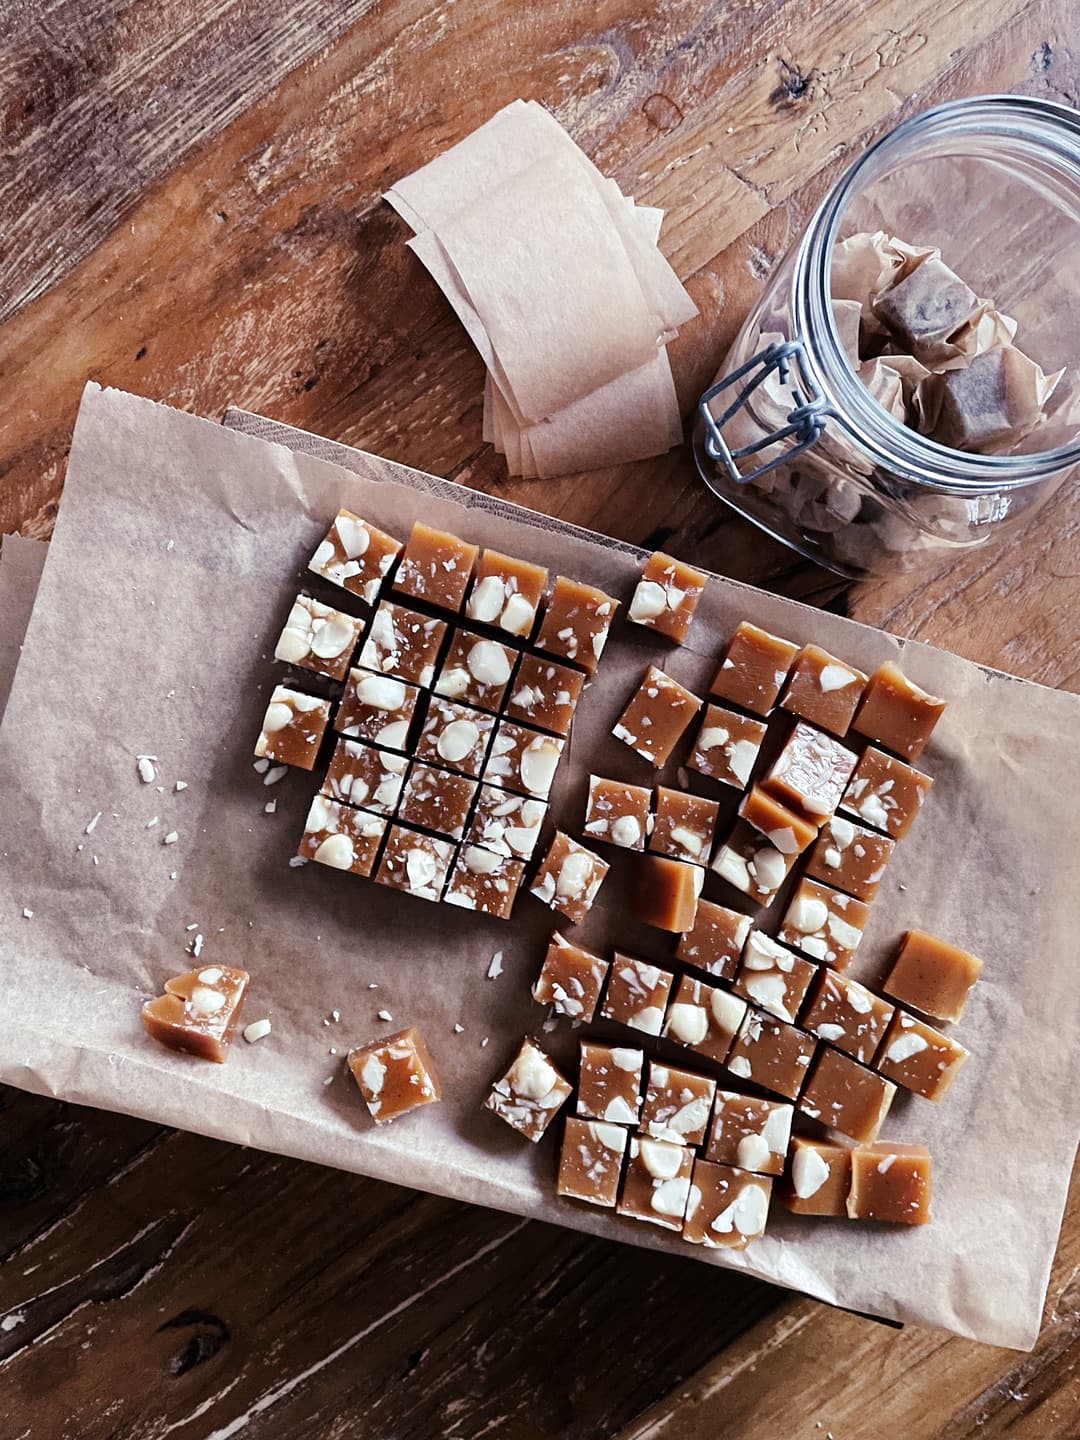 Chopped up pieces of caramel candy, laying on baking paper. There's also a glass jar with wrapped candies and wrapping paper.